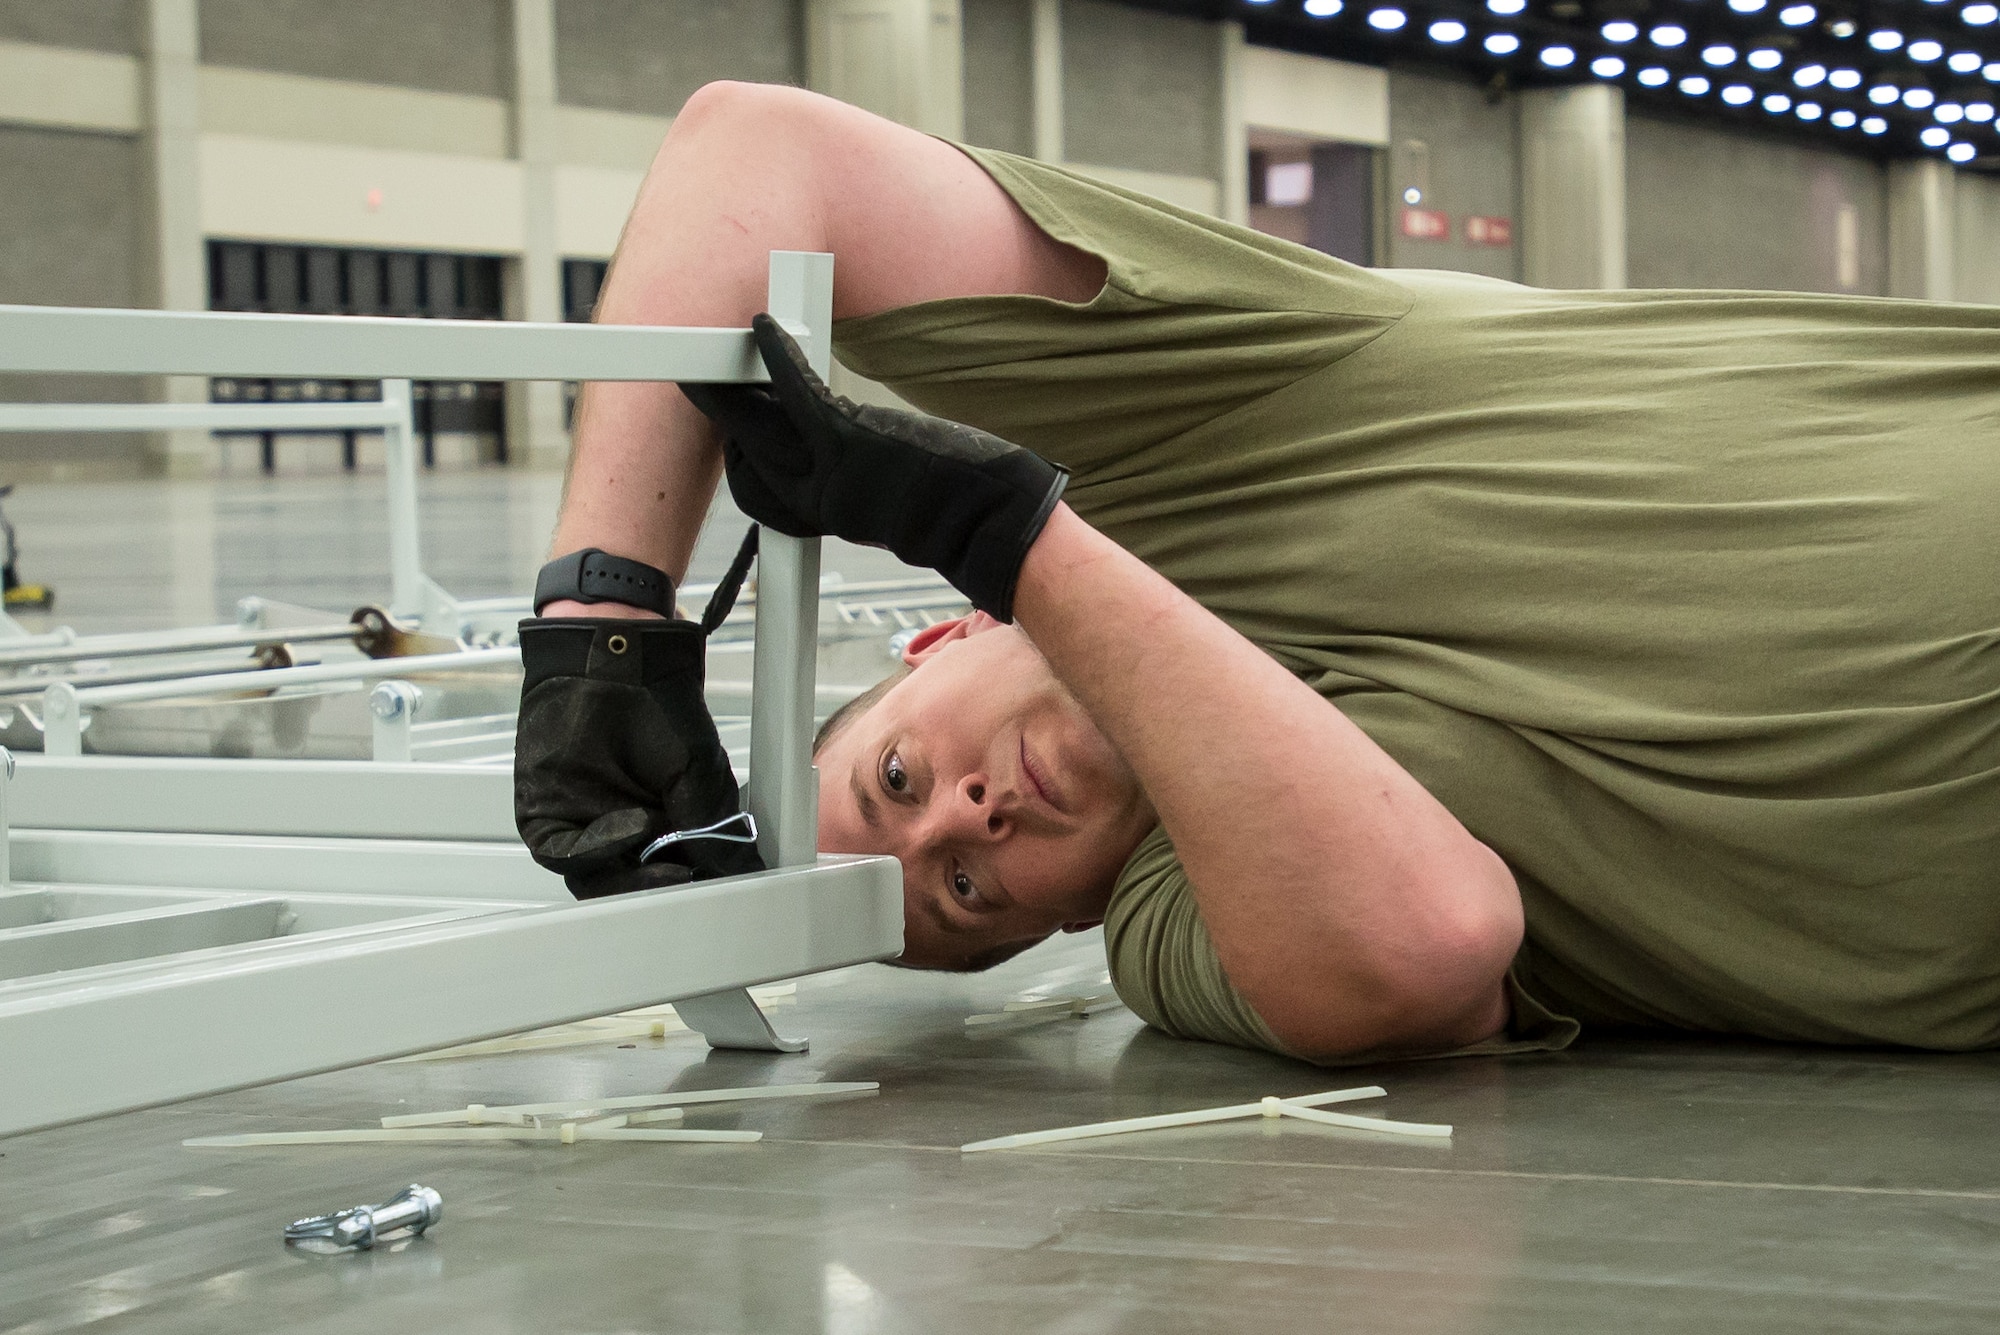 Tech. Sgt. Brandon Hall of the Kentucky Air National Guard’s 123rd Civil Engineer Squadron sets up hospital beds at the Kentucky Fair and Exposition Center in Louisville, Ky., April 11, 2020. The site, which is expected to be operational April 15, will serve as an Alternate Care Facility for patients suffering from COVID-19 if area hospitals exceed available capacity. The location initially can treat up to 288 patients and is scalable to 2,000 beds. (U.S. Air National Guard photo by Dale Greer)